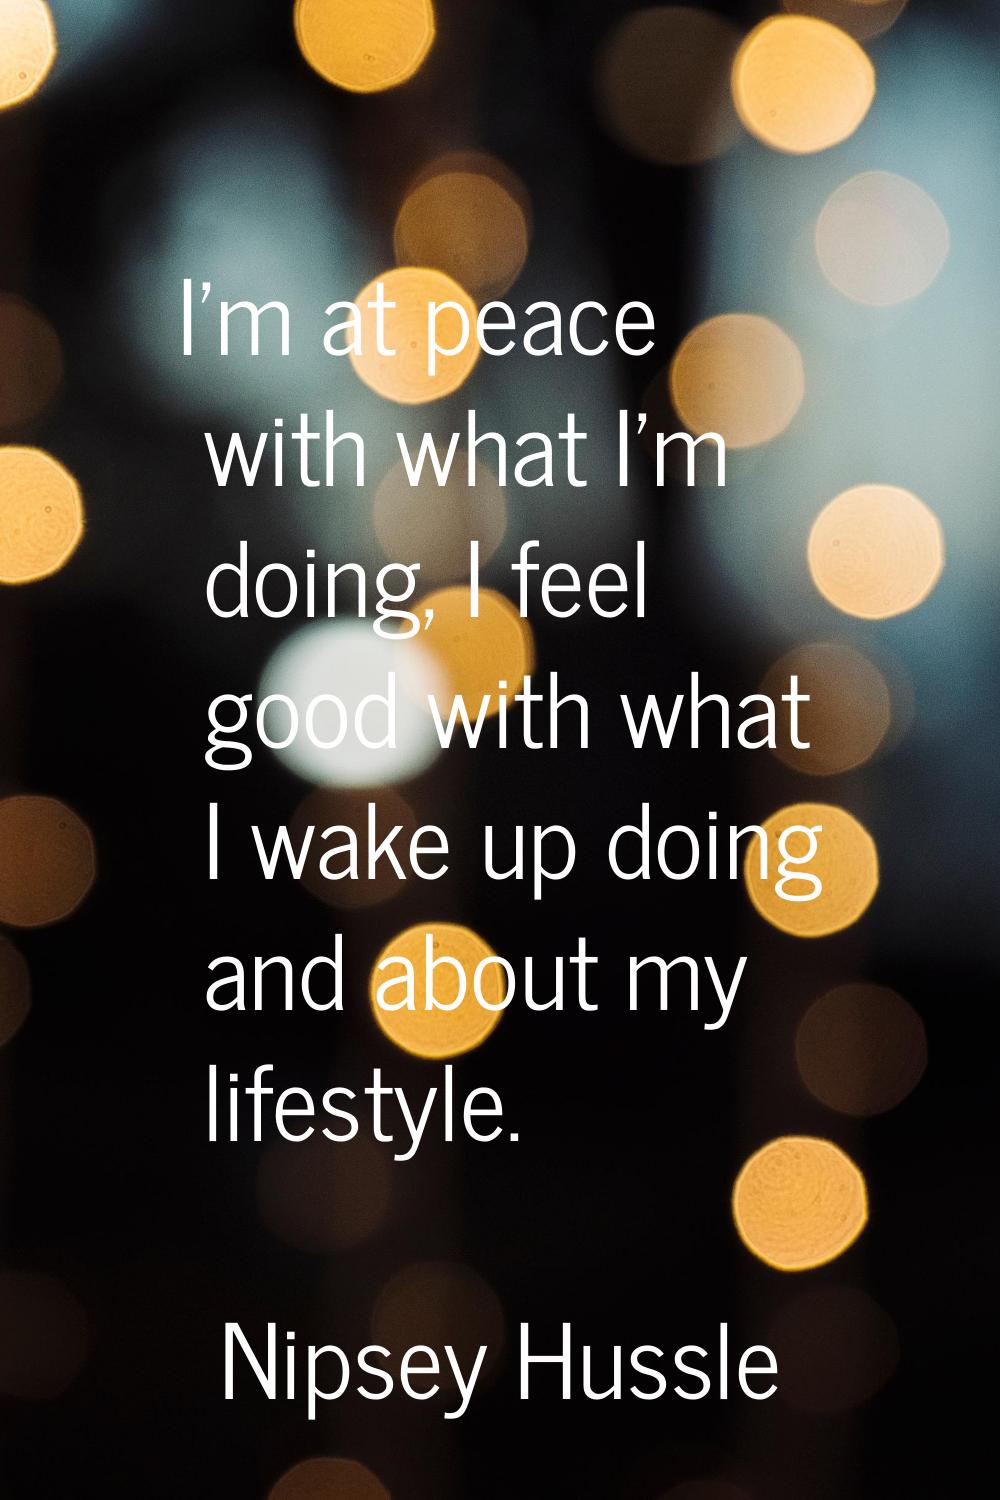 I'm at peace with what I'm doing, I feel good with what I wake up doing and about my lifestyle.